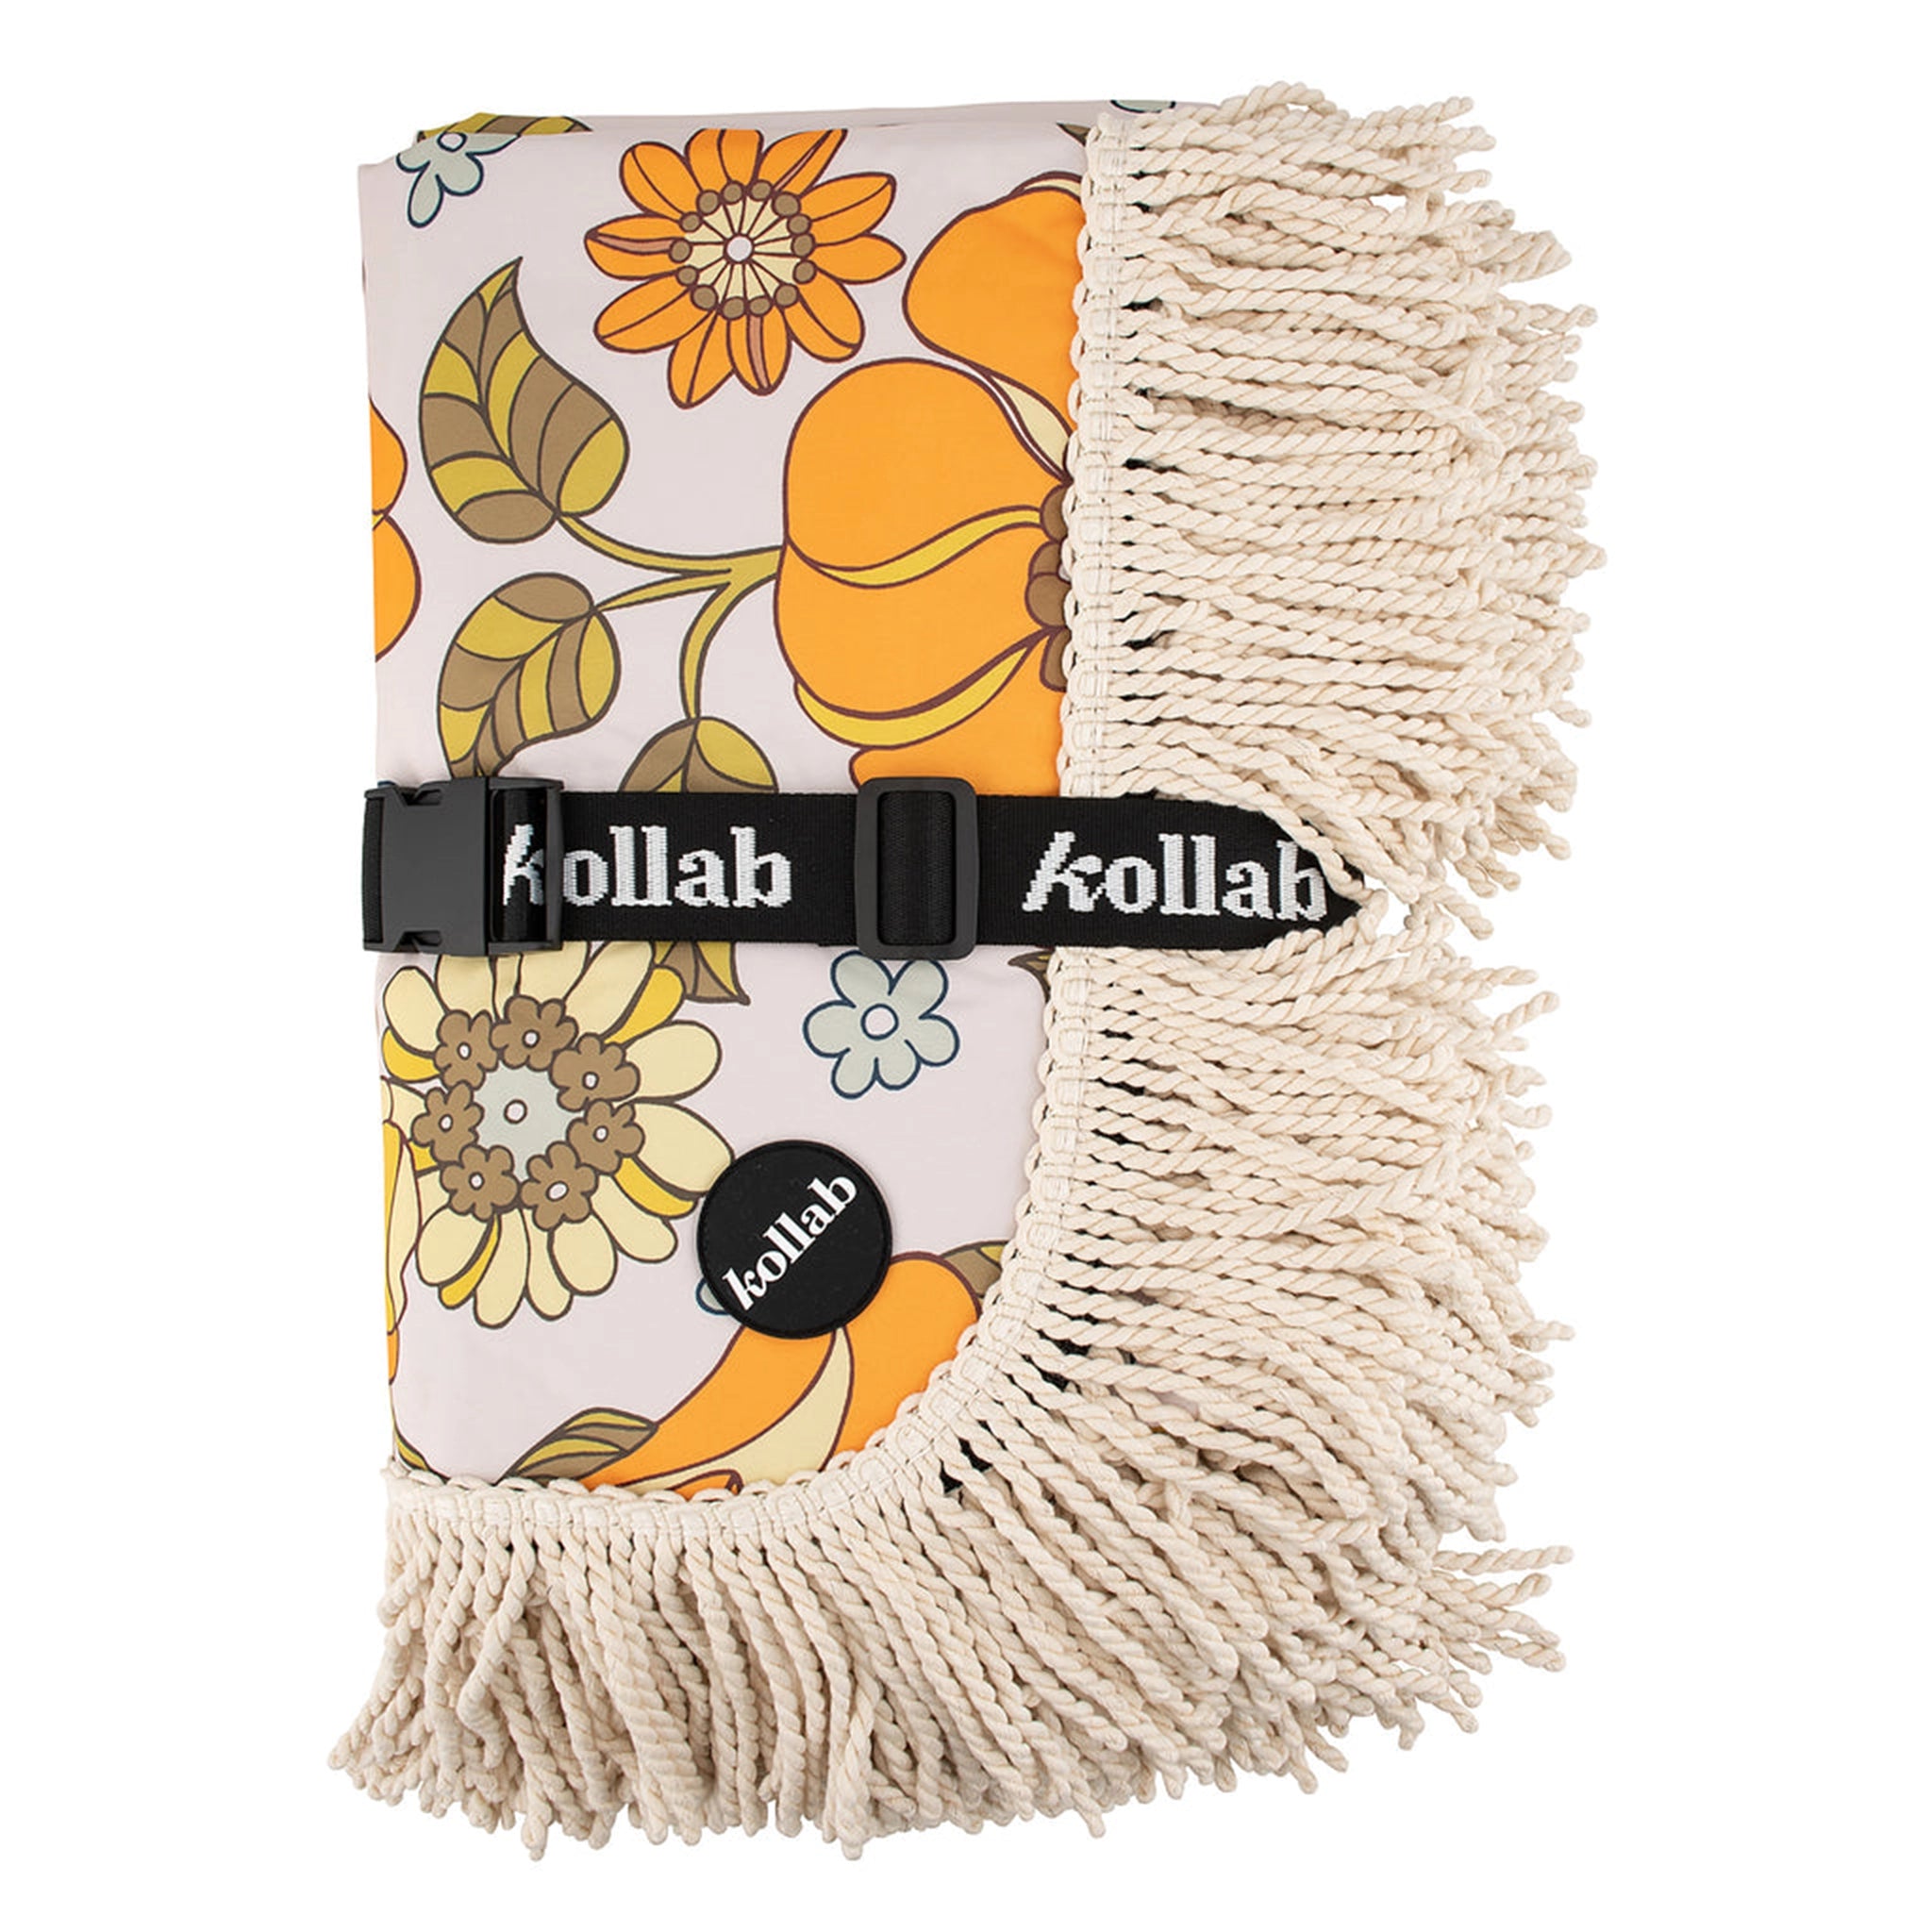 A 70&#39;s style yellow and orange floral picnic mat with cream fringe detailing around the edges.